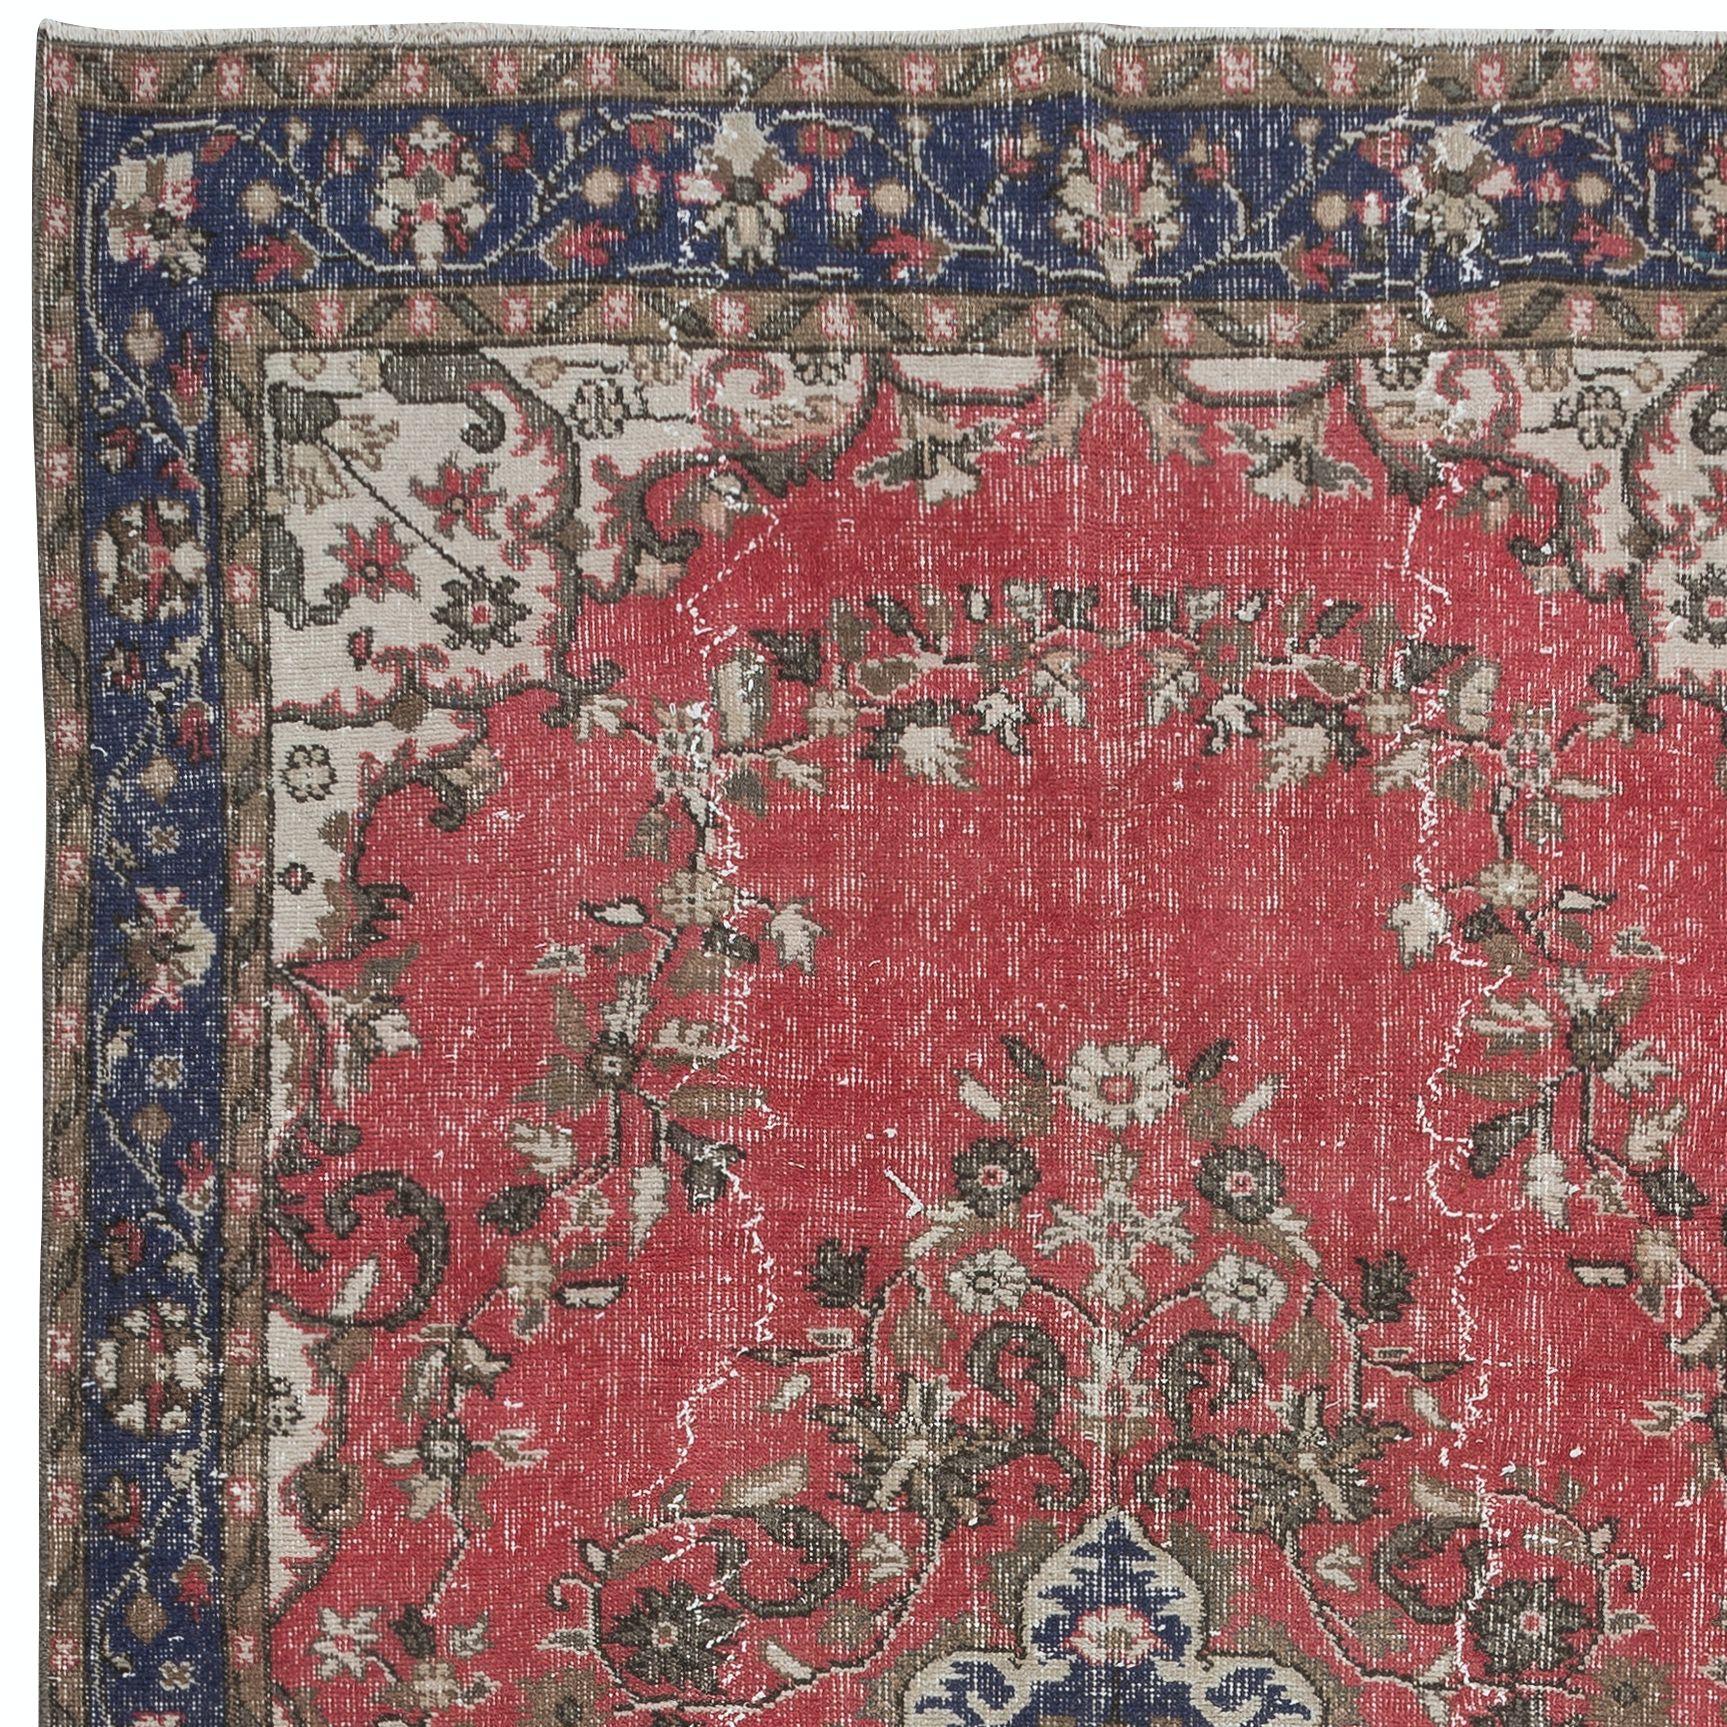 Hand-Knotted 5.6x10.2 Ft Vintage Handmade Turkish Wool Area Rug in Red, Beige & Dark Blue For Sale